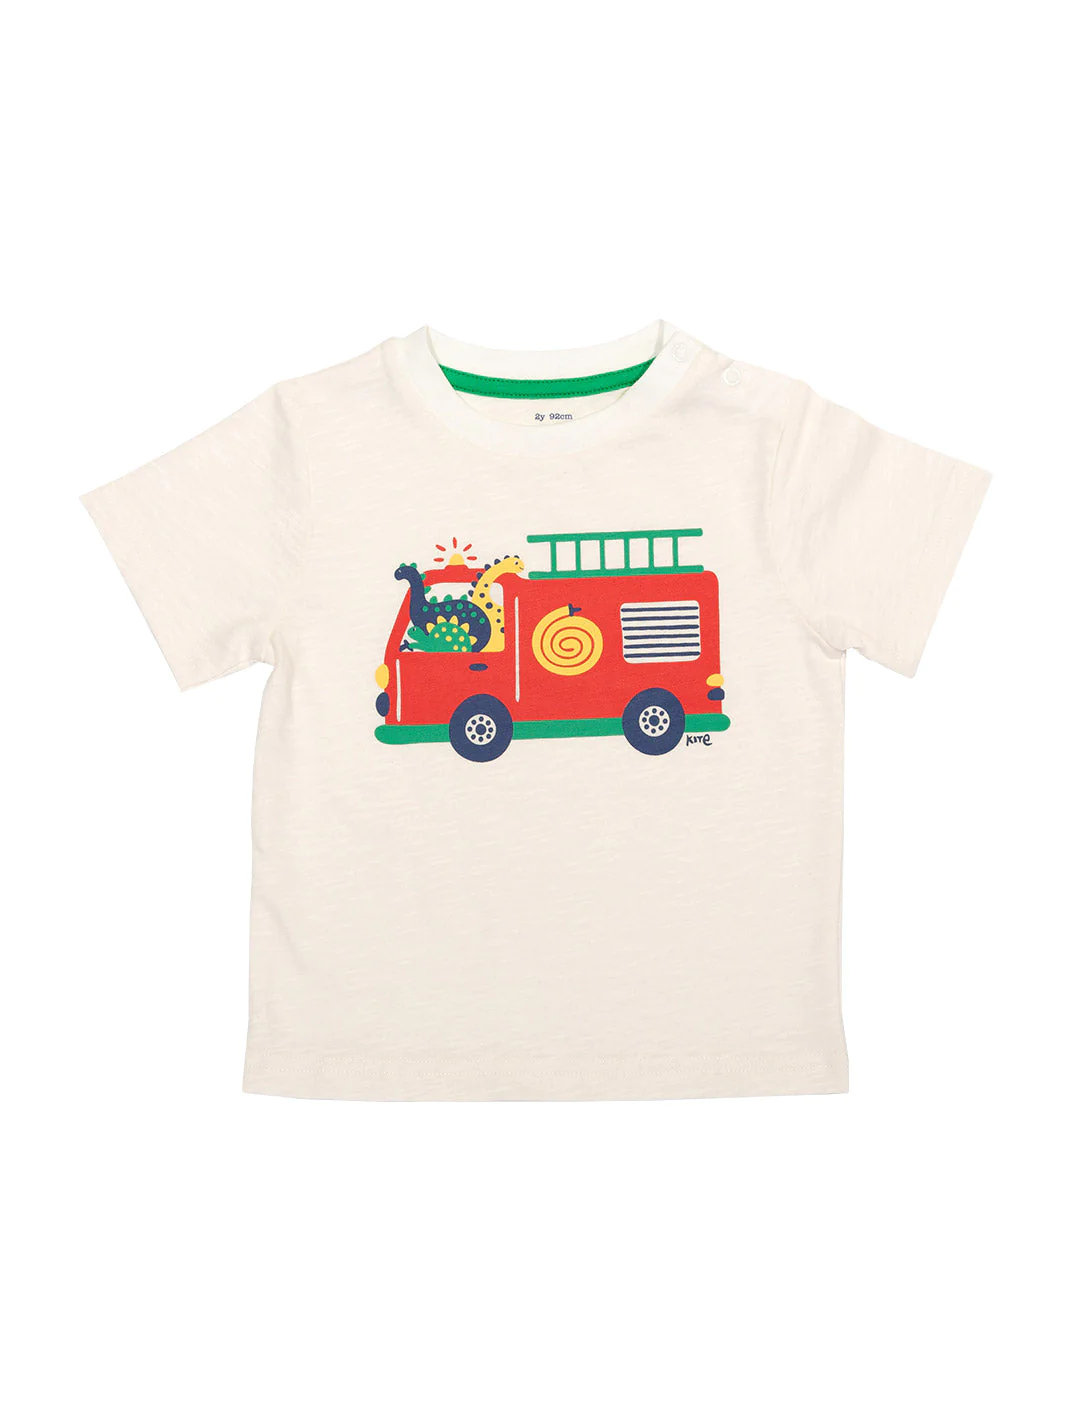 Fire Engine T-Shirt by Kite